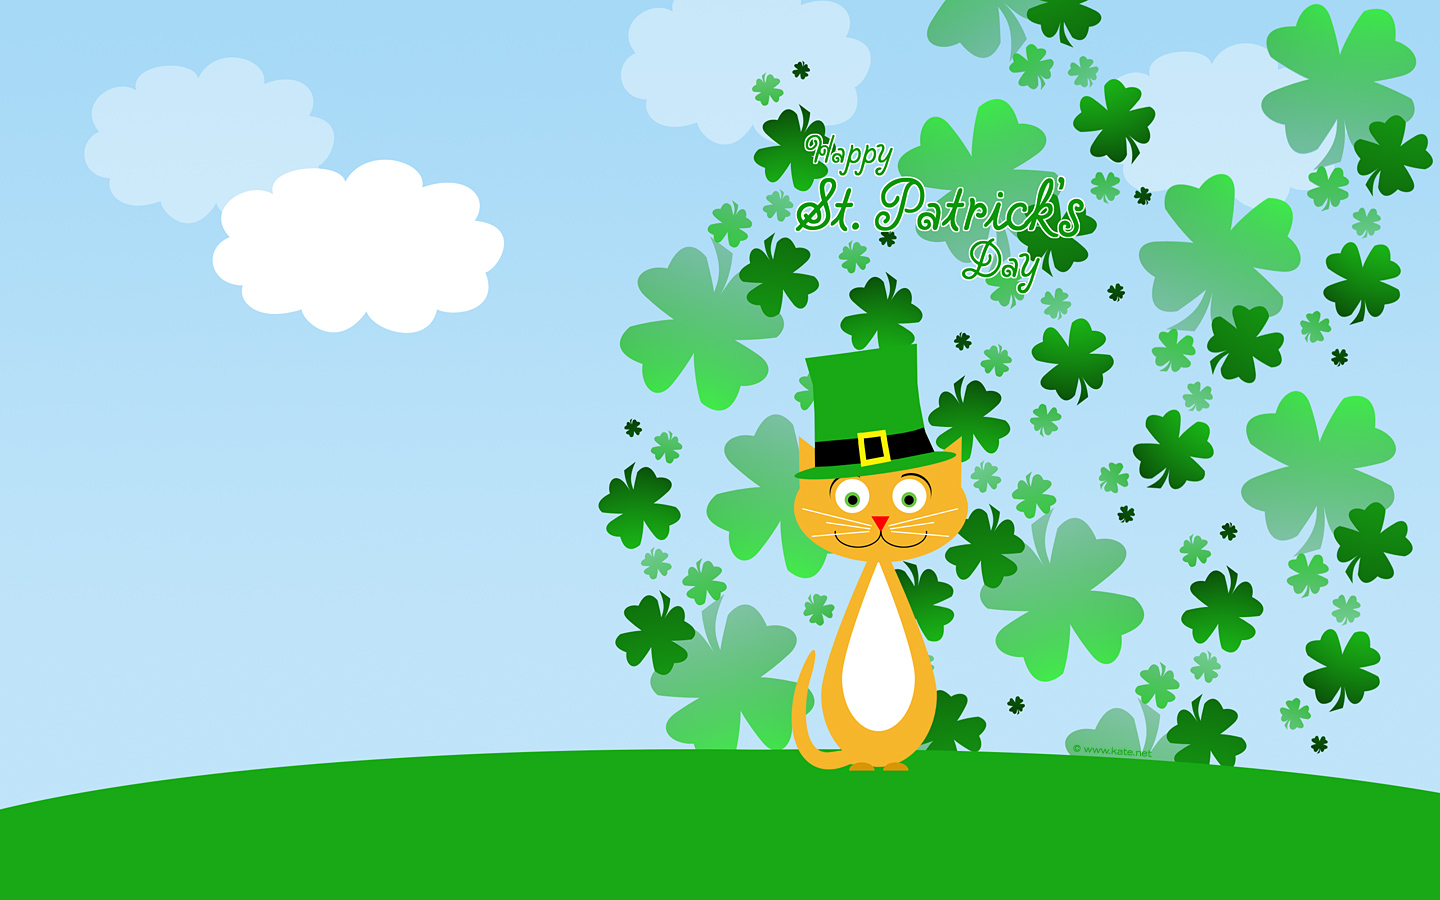 St Patricks Day Wallpaper   Miscellaneous Photos and Wallpapers